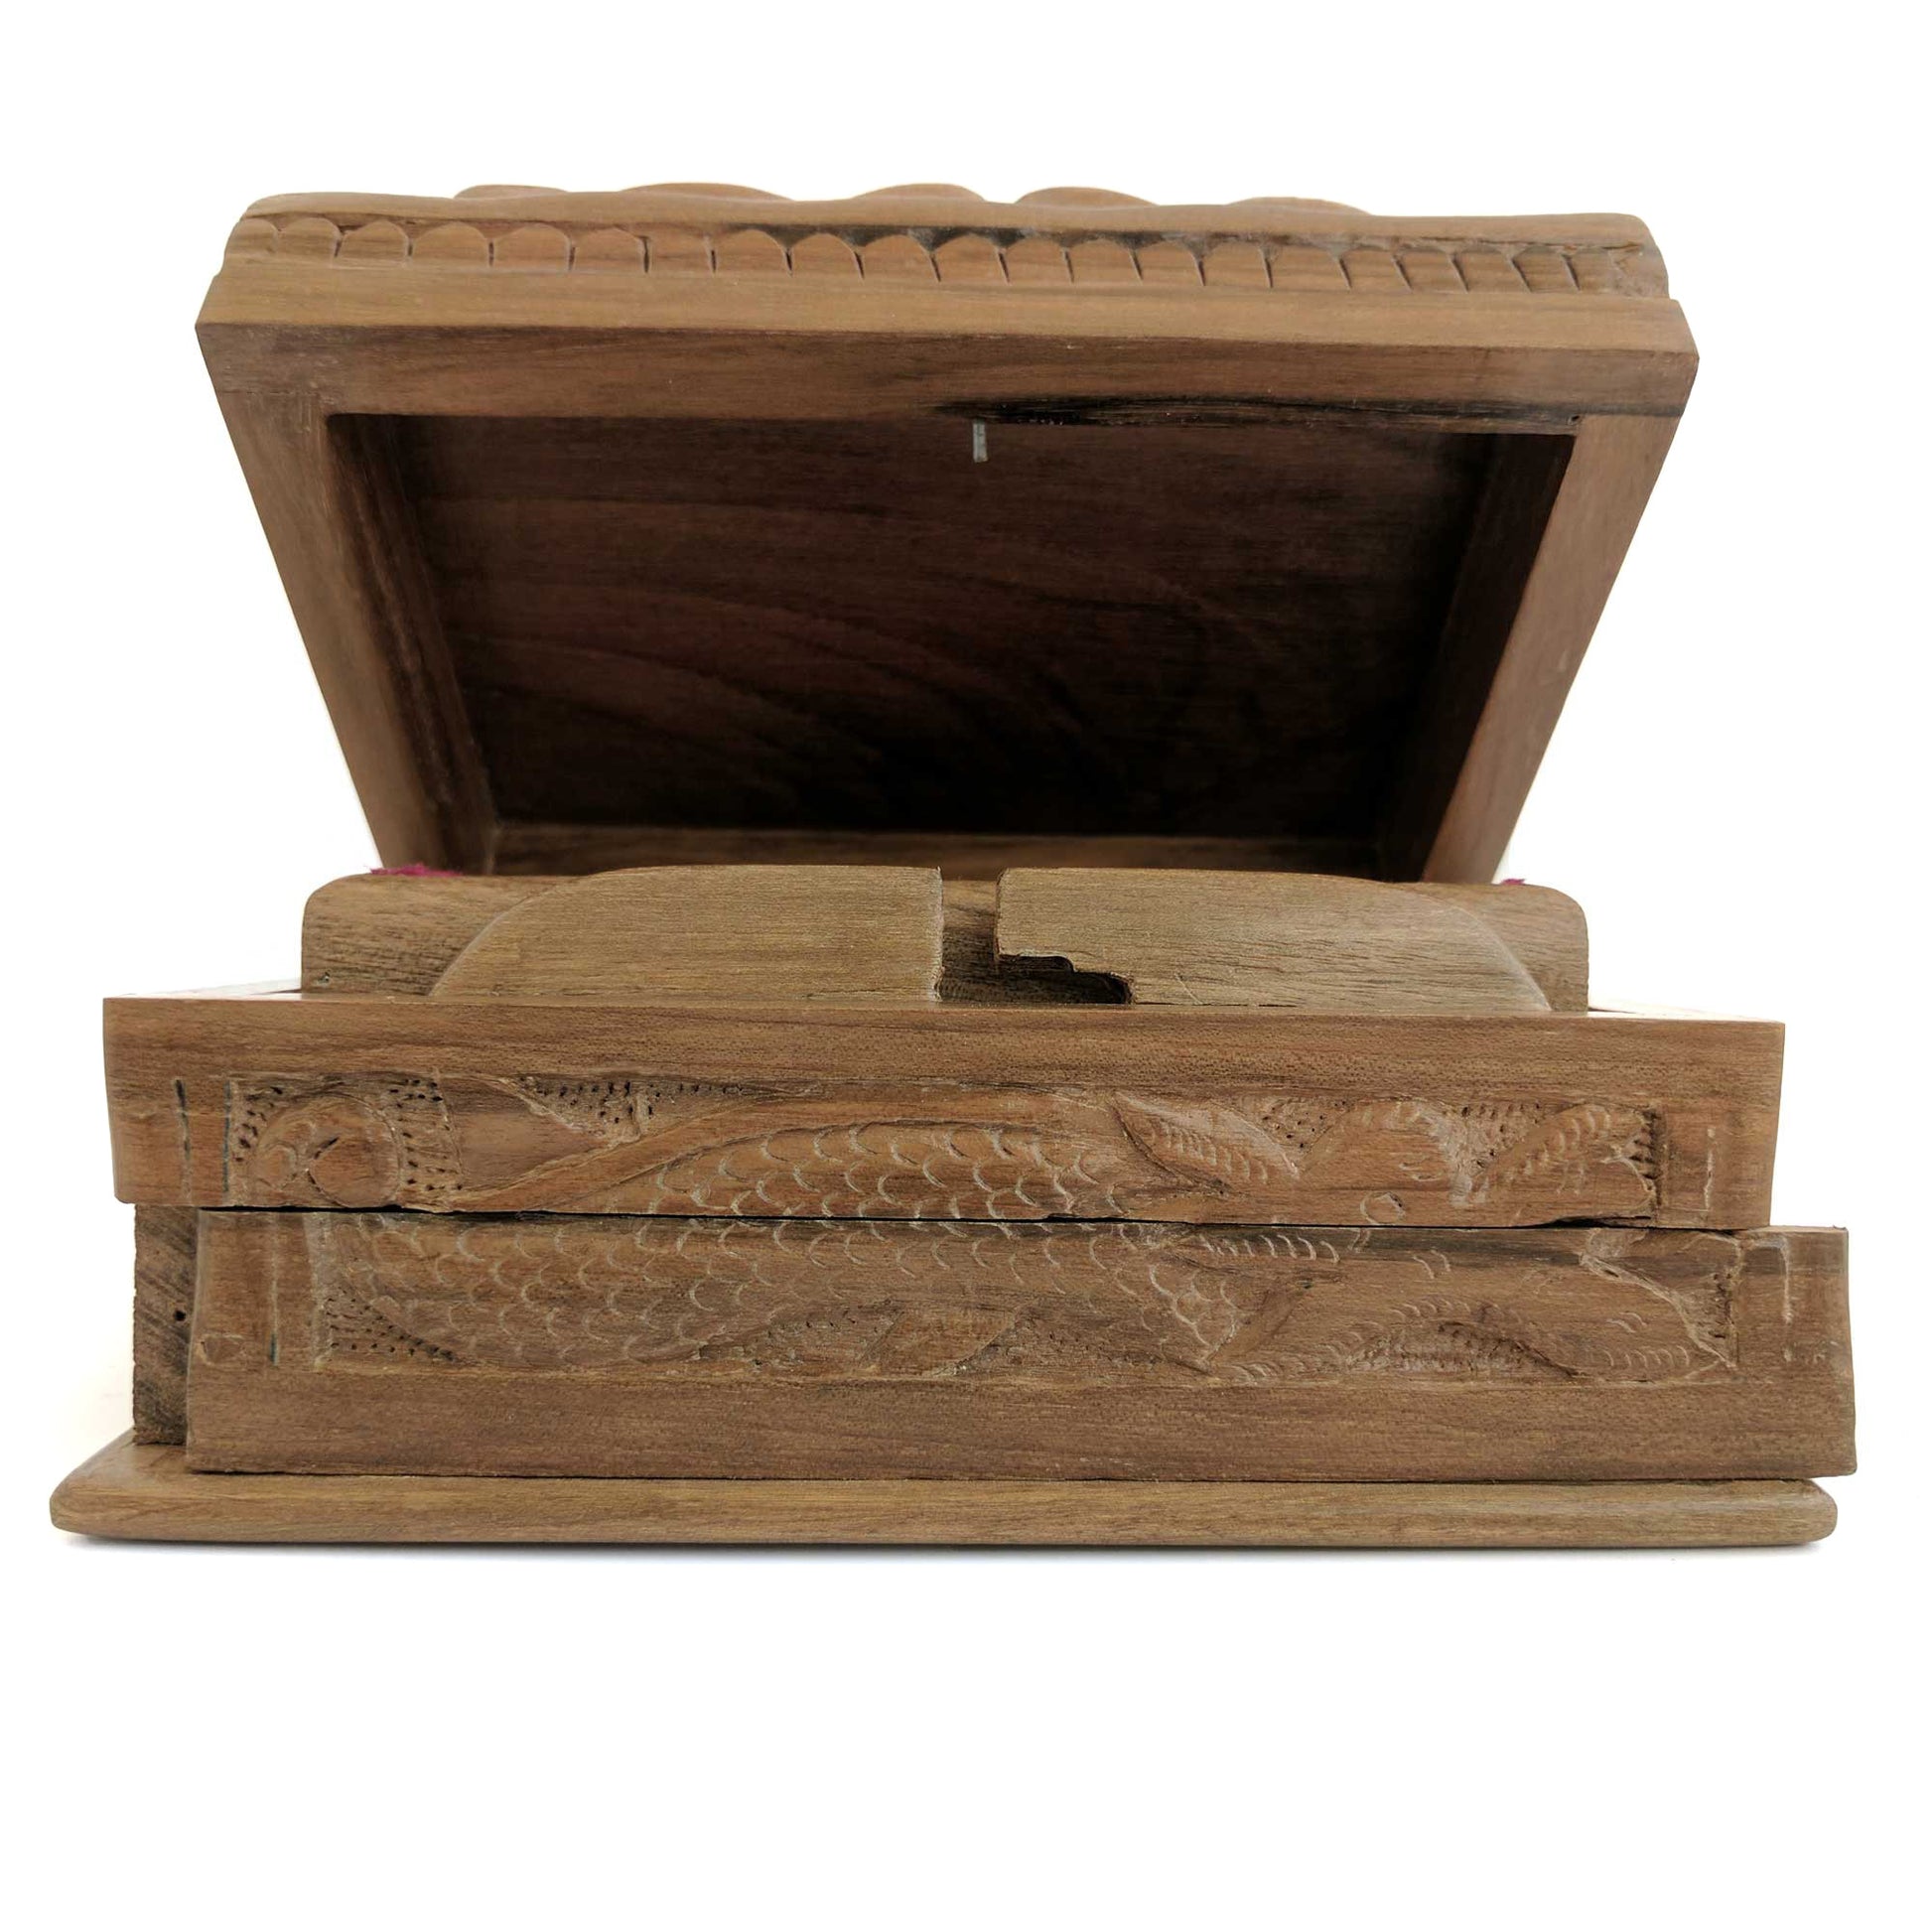 Wooden Secret Box made from Walnut Wood with dragon design